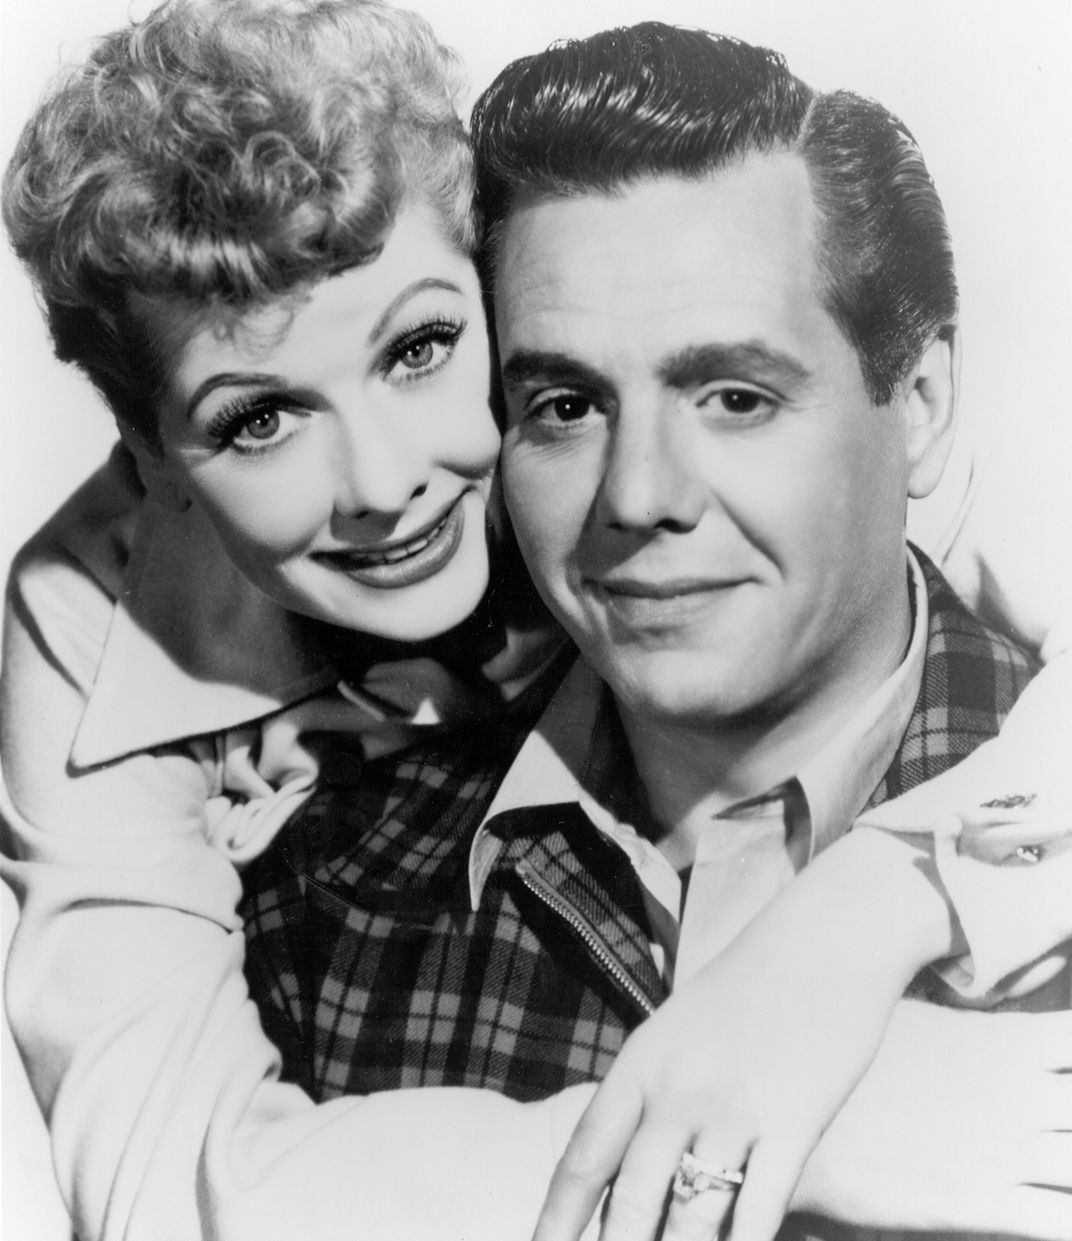 Publicity photo of Lucille and Desi in 1956